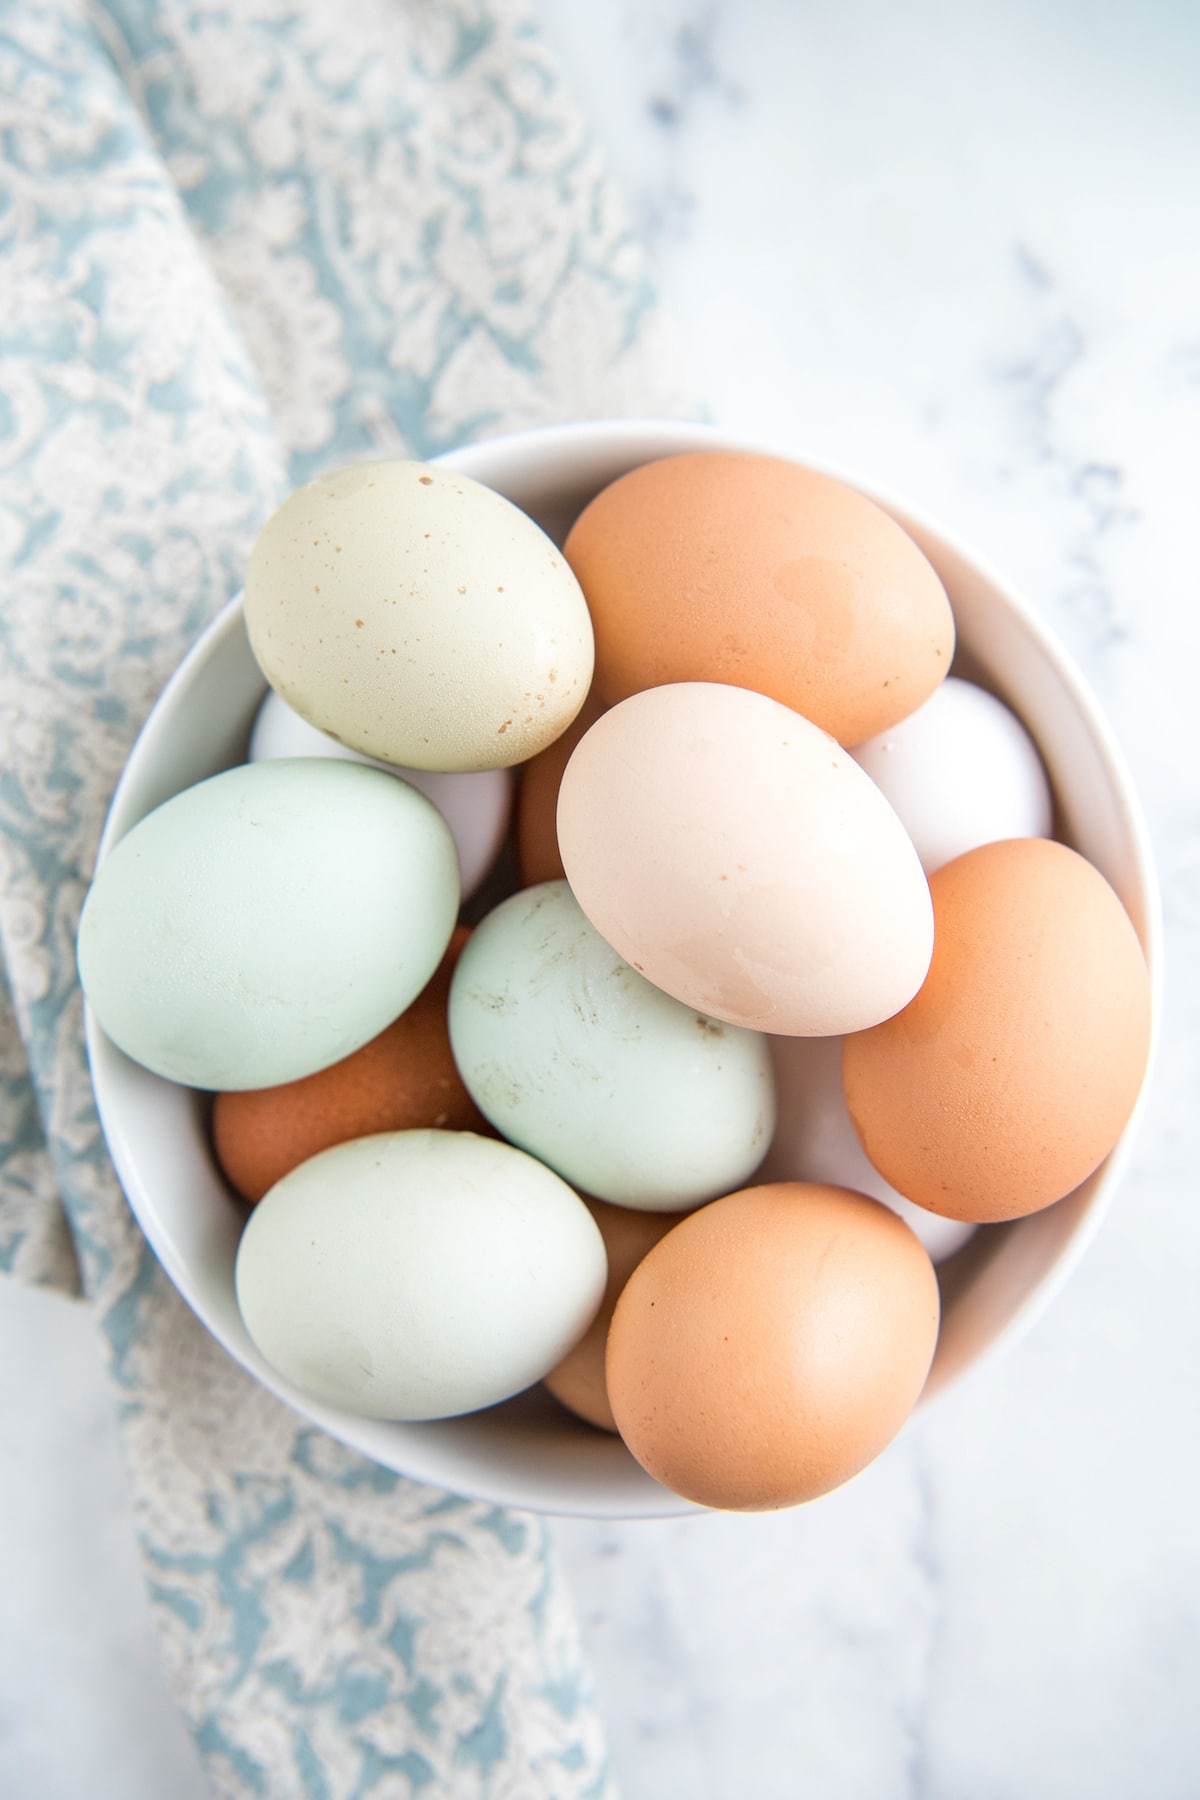 Colorful eggs in a white bowl with a tea towel.